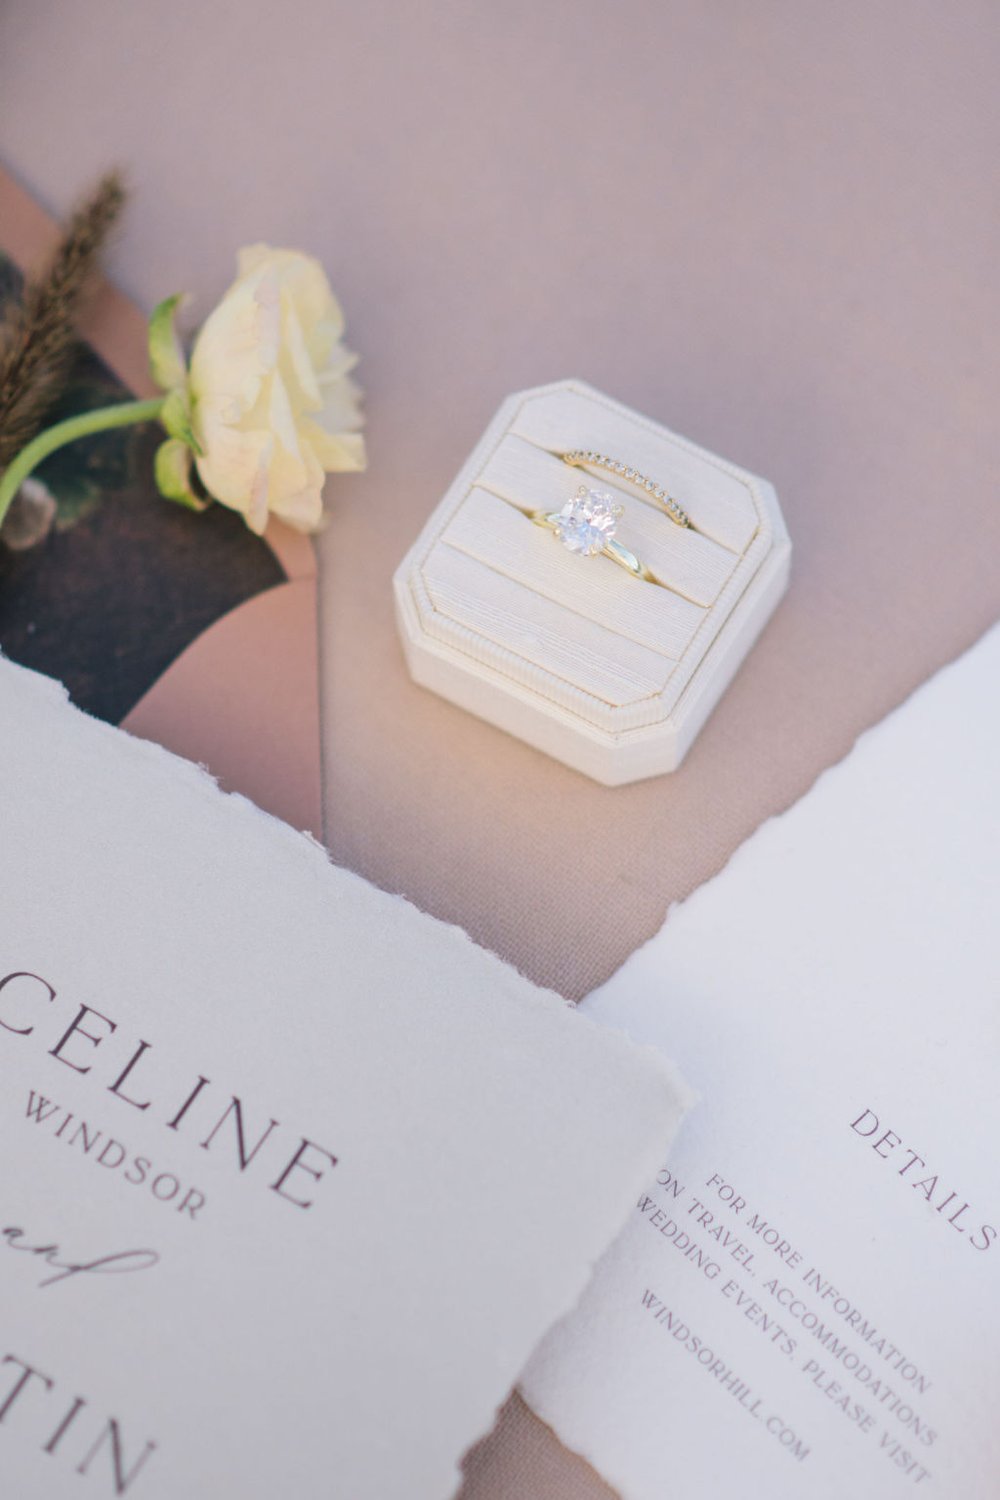 Gold solitare ring in Mrs Box in linen design complimented by custom invitation by Paper Palette.